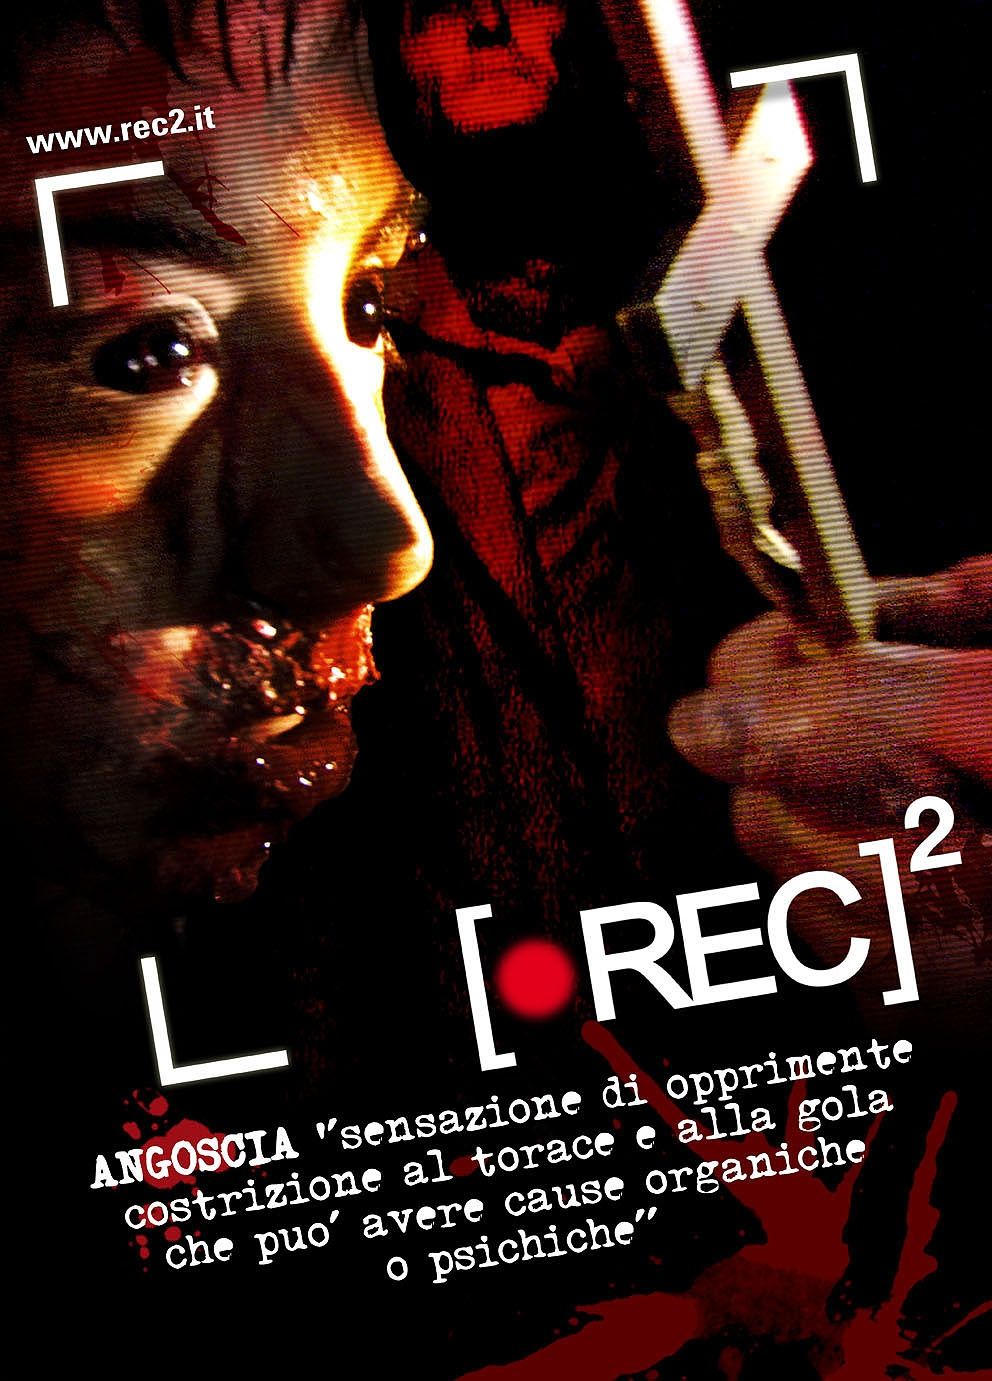 Extra Large Movie Poster Image for [Rec] 2 (#4 of 7)